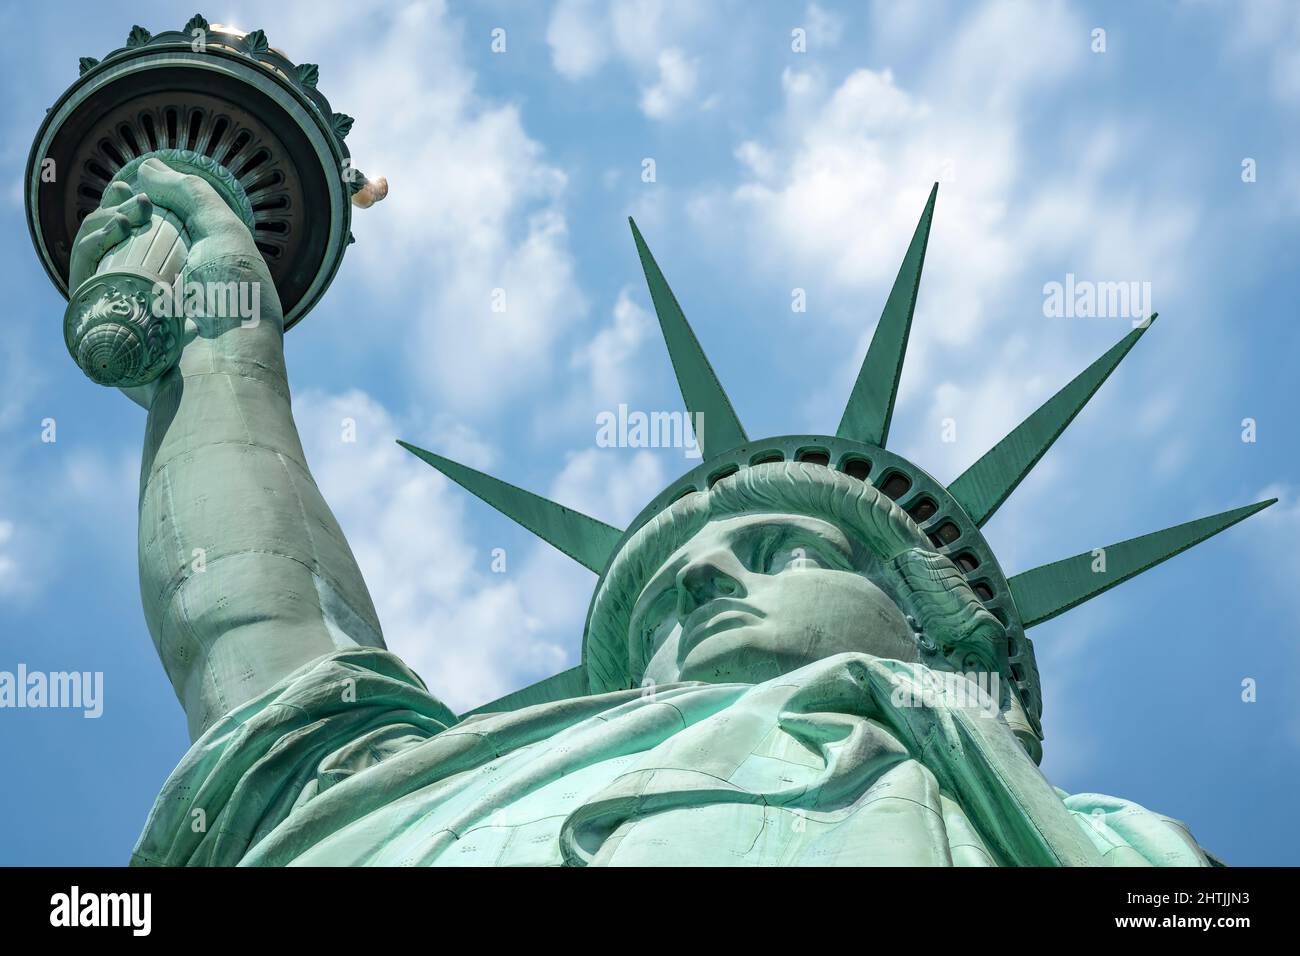 The Statue of Liberty standing on Liberty Island in the middle of New York Harbor, Manhattan, New York - USA. Stock Photo